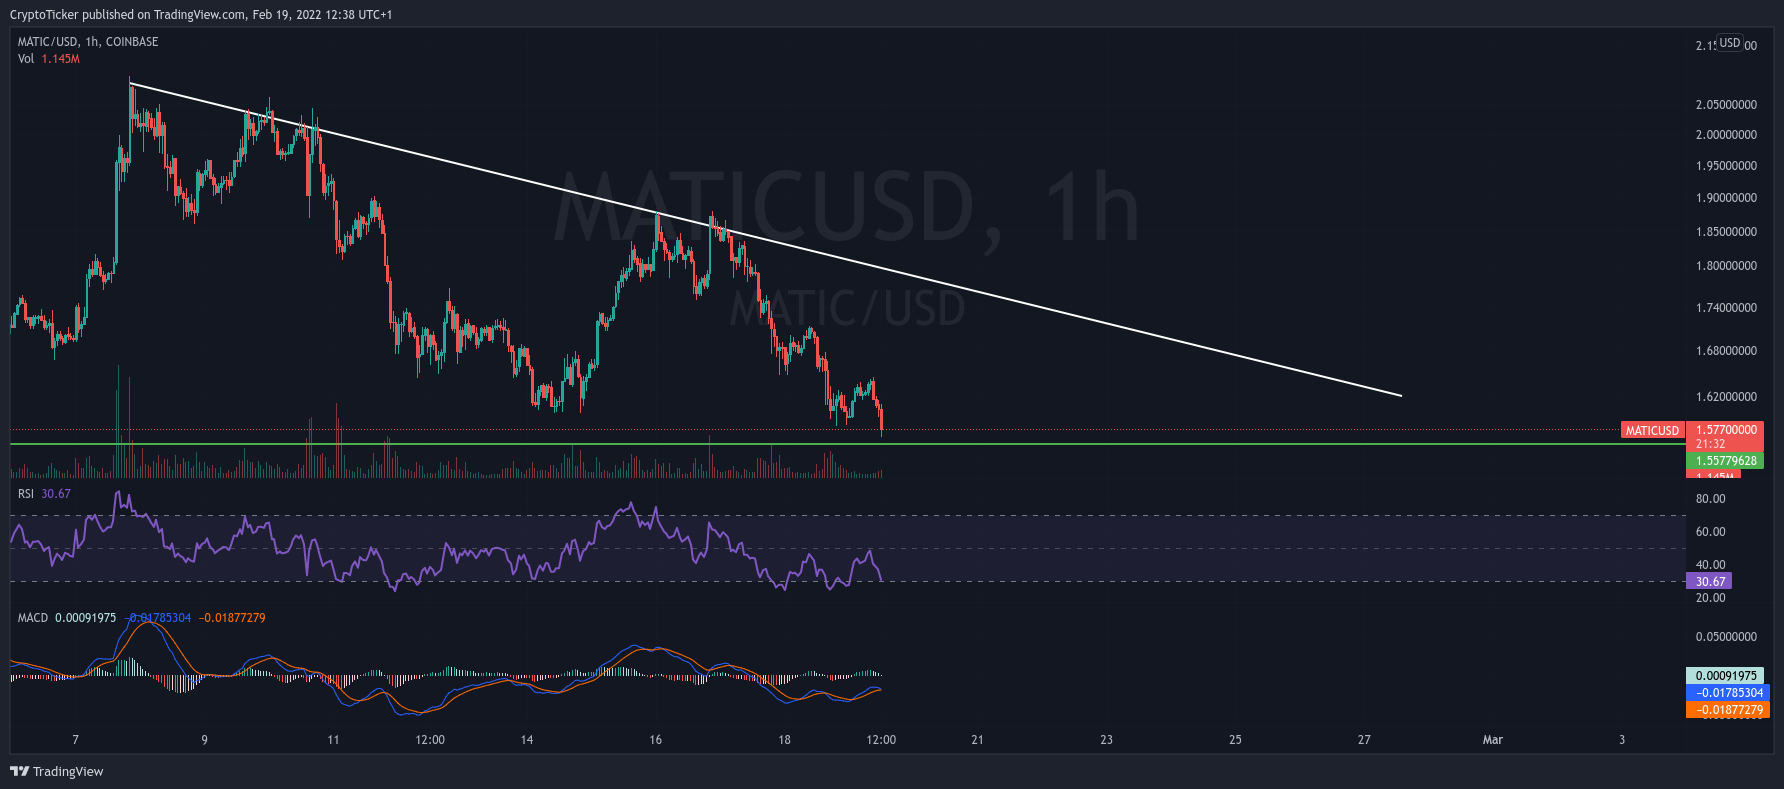 Worst Crypto - MATIC/USD 1-hour chart